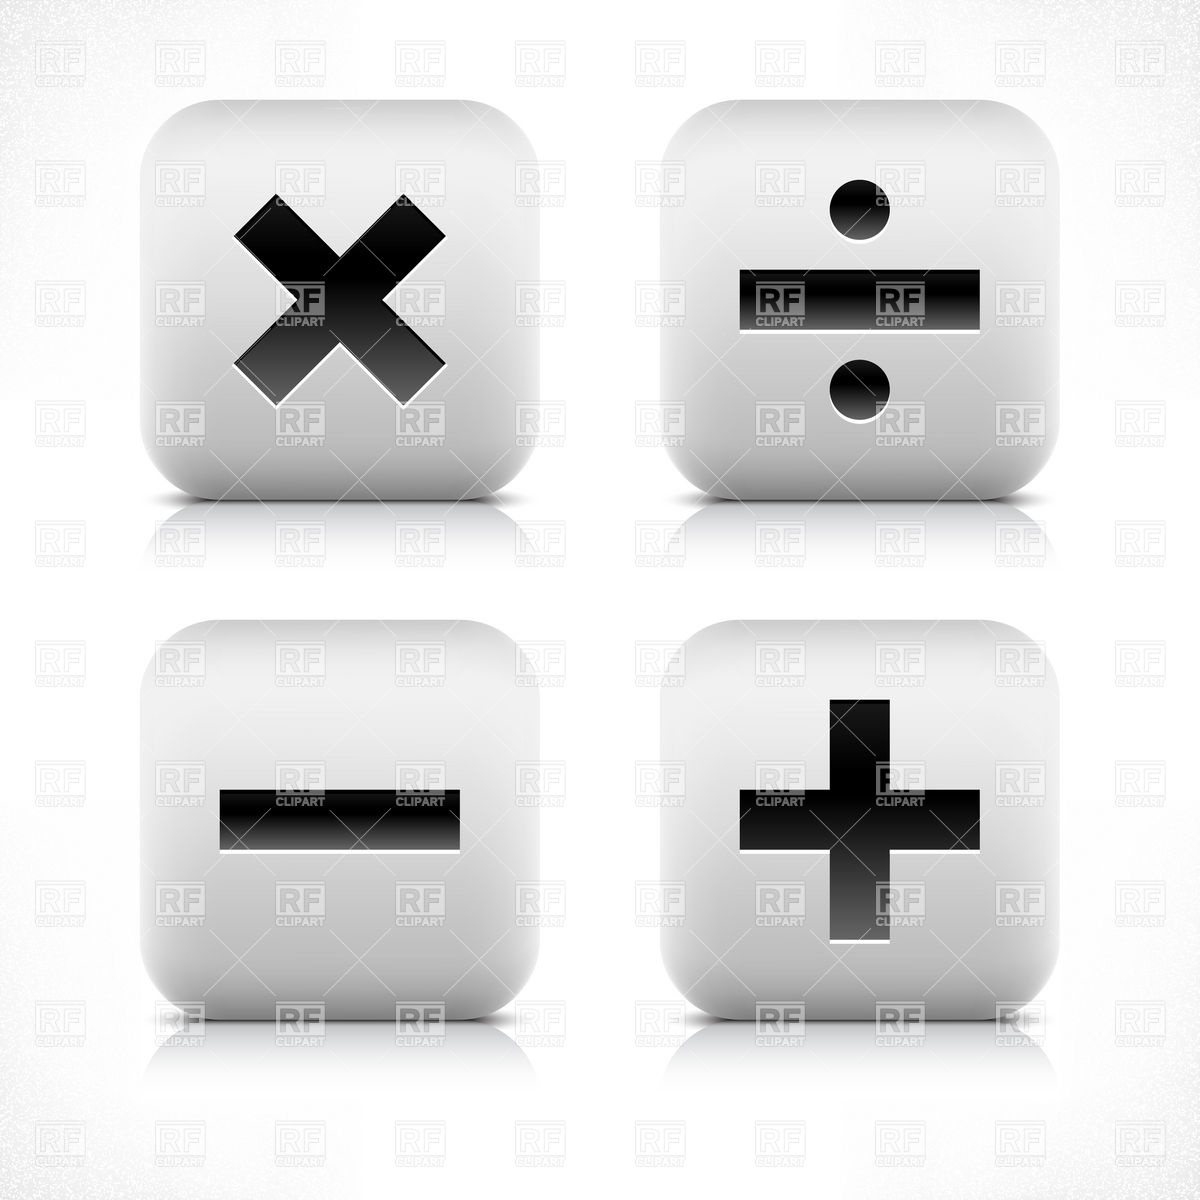 Gray square buttons with math signs, 13073, Signs, Symbols, Maps ...